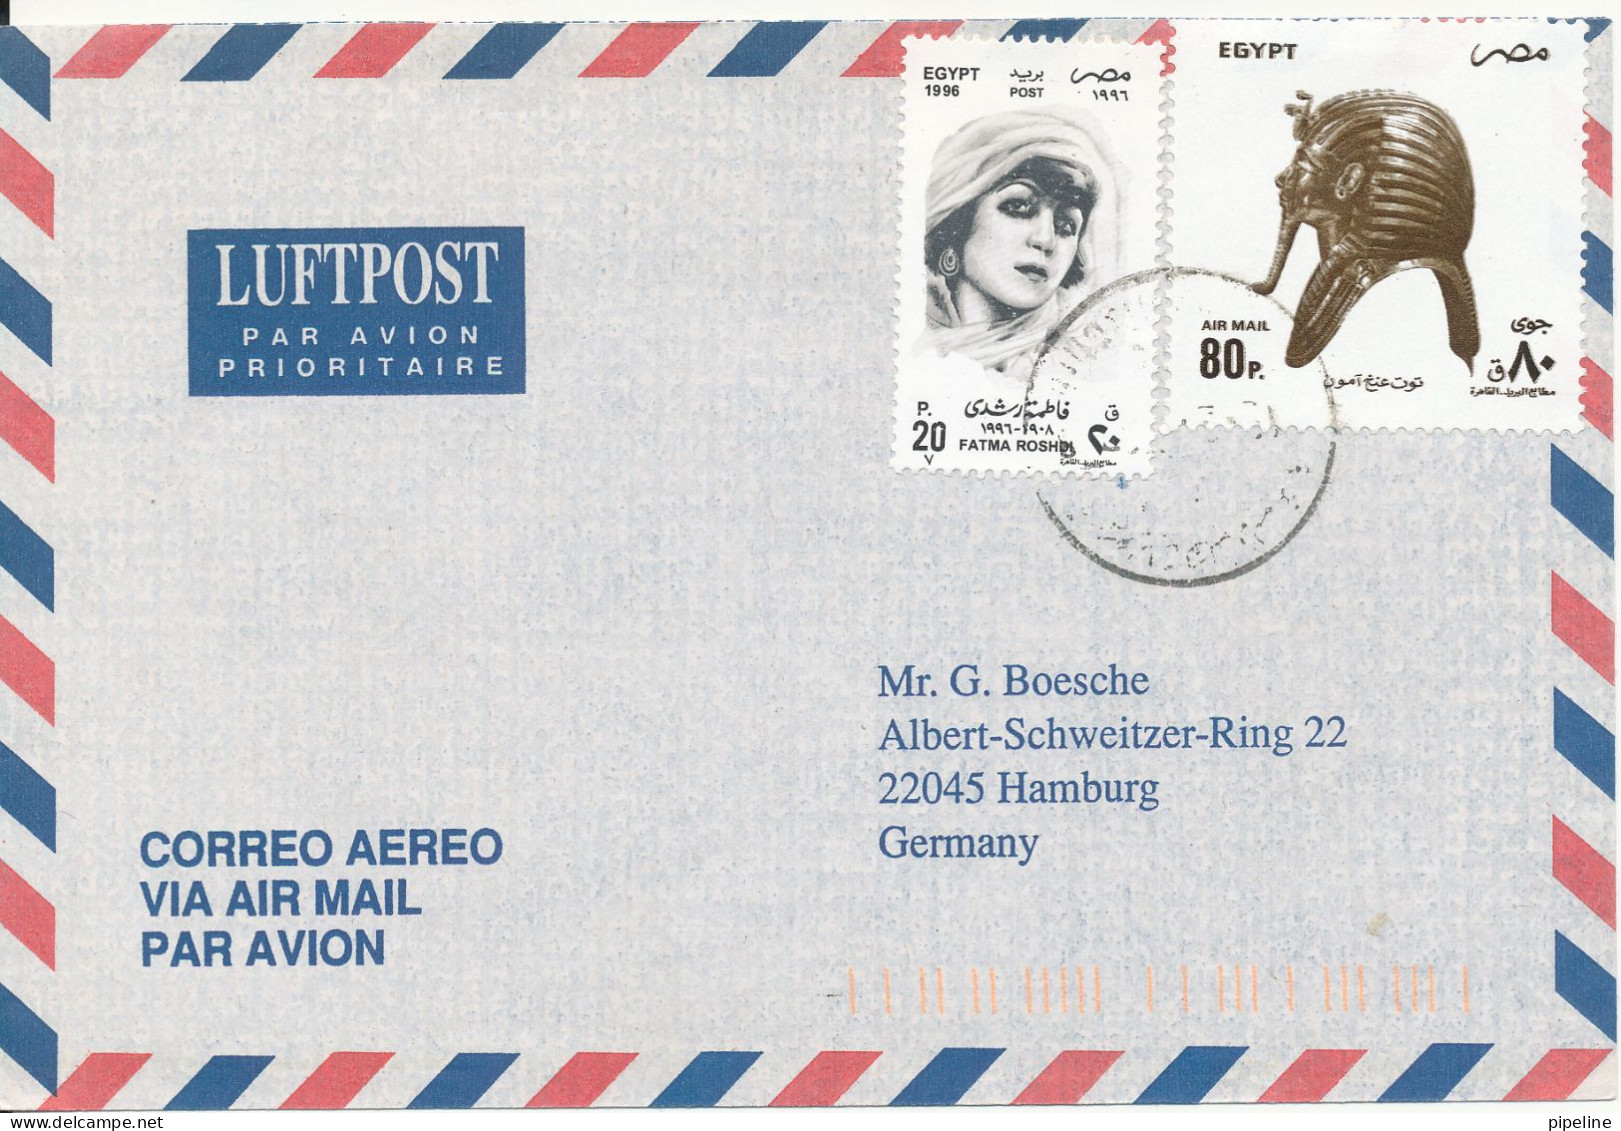 Egypt Air Mail Cover Sent To Germany (one Of The Stamps Is Damaged At The Top) - Posta Aerea